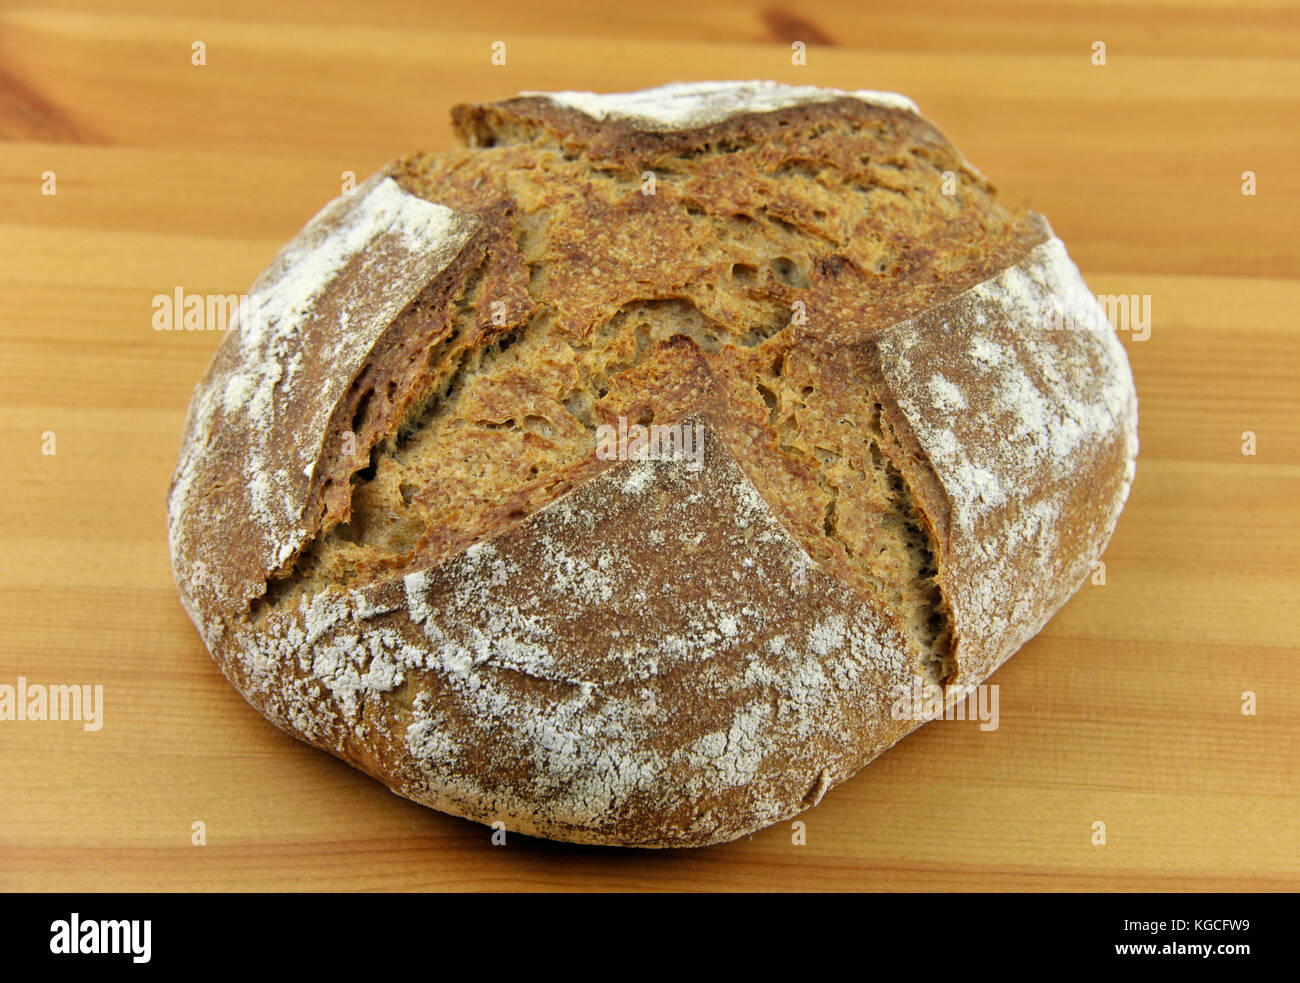 Crusty homemade artisan round wholemeal or whole wheat sourdough bread loaf made from natural wild yeast sourdough starter culture. Stock Photo